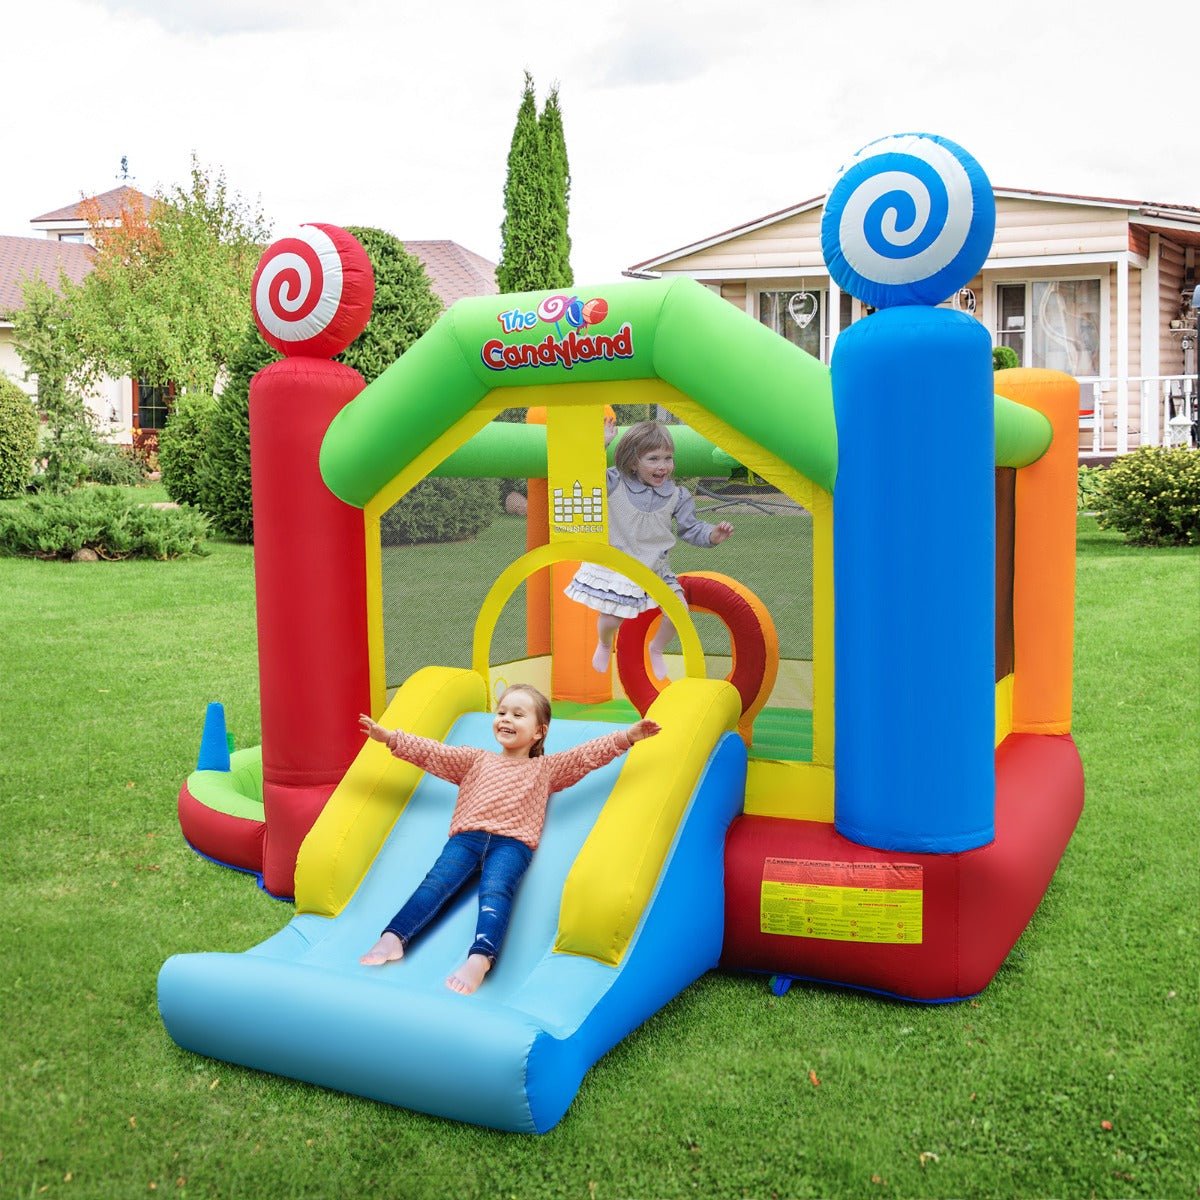 Candy Land Bounce House with Slide - Buy Now for Fun Times!